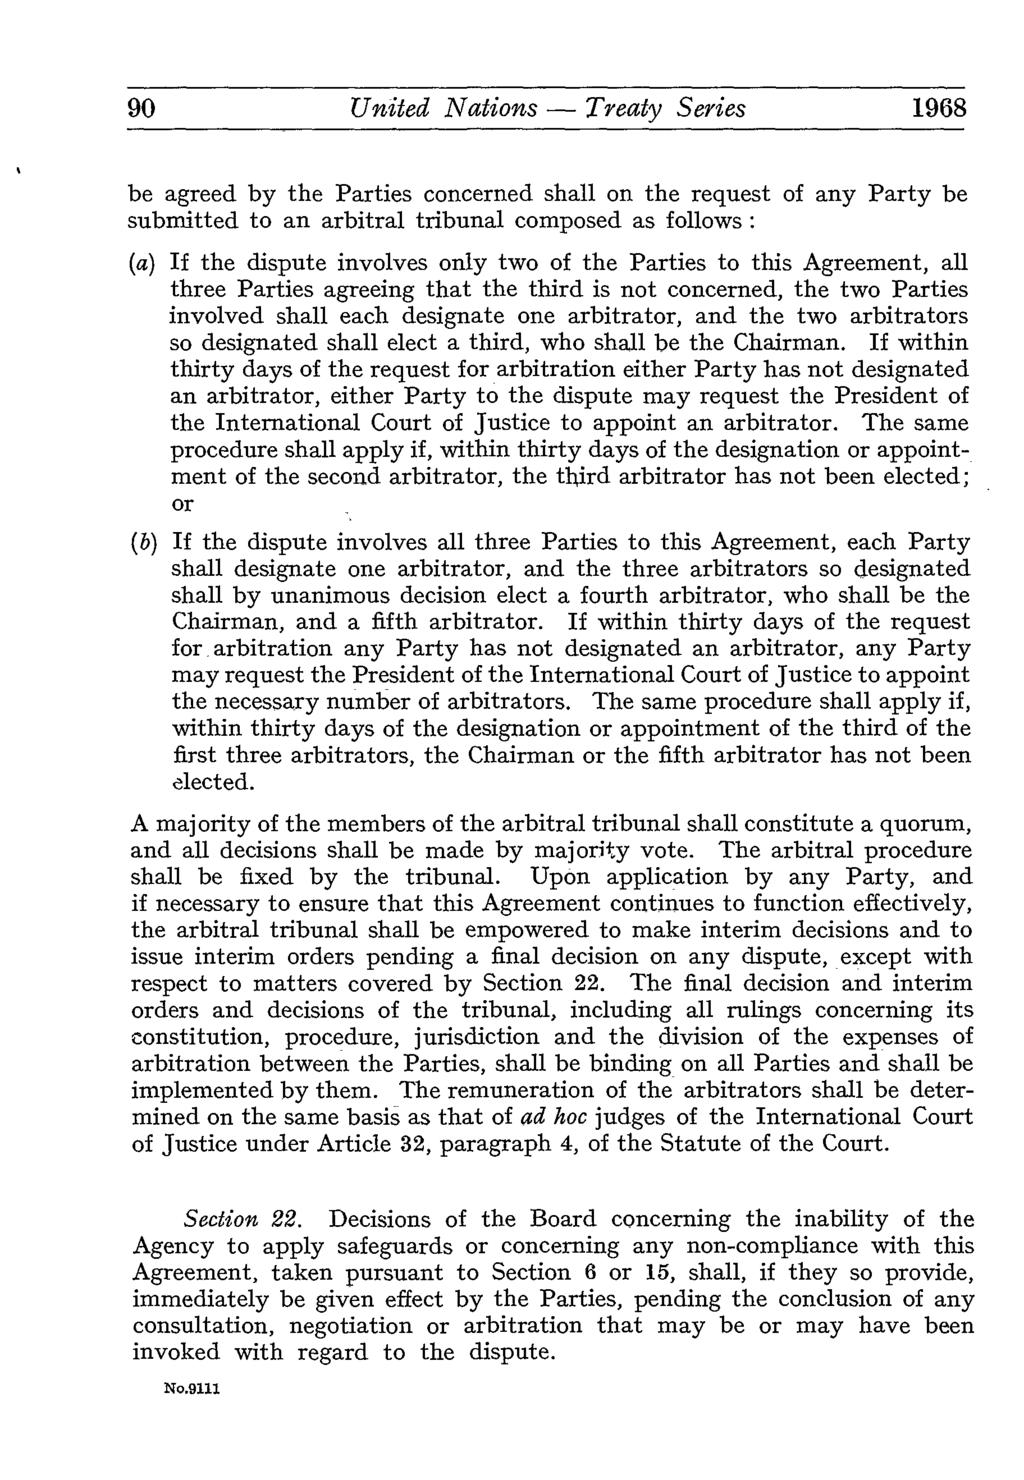 90 United Nations Treaty Series 1968 be agreed by the Parties concerned shall on the request of any Party be submitted to an arbitral tribunal composed as follows : (a) If the dispute involves only